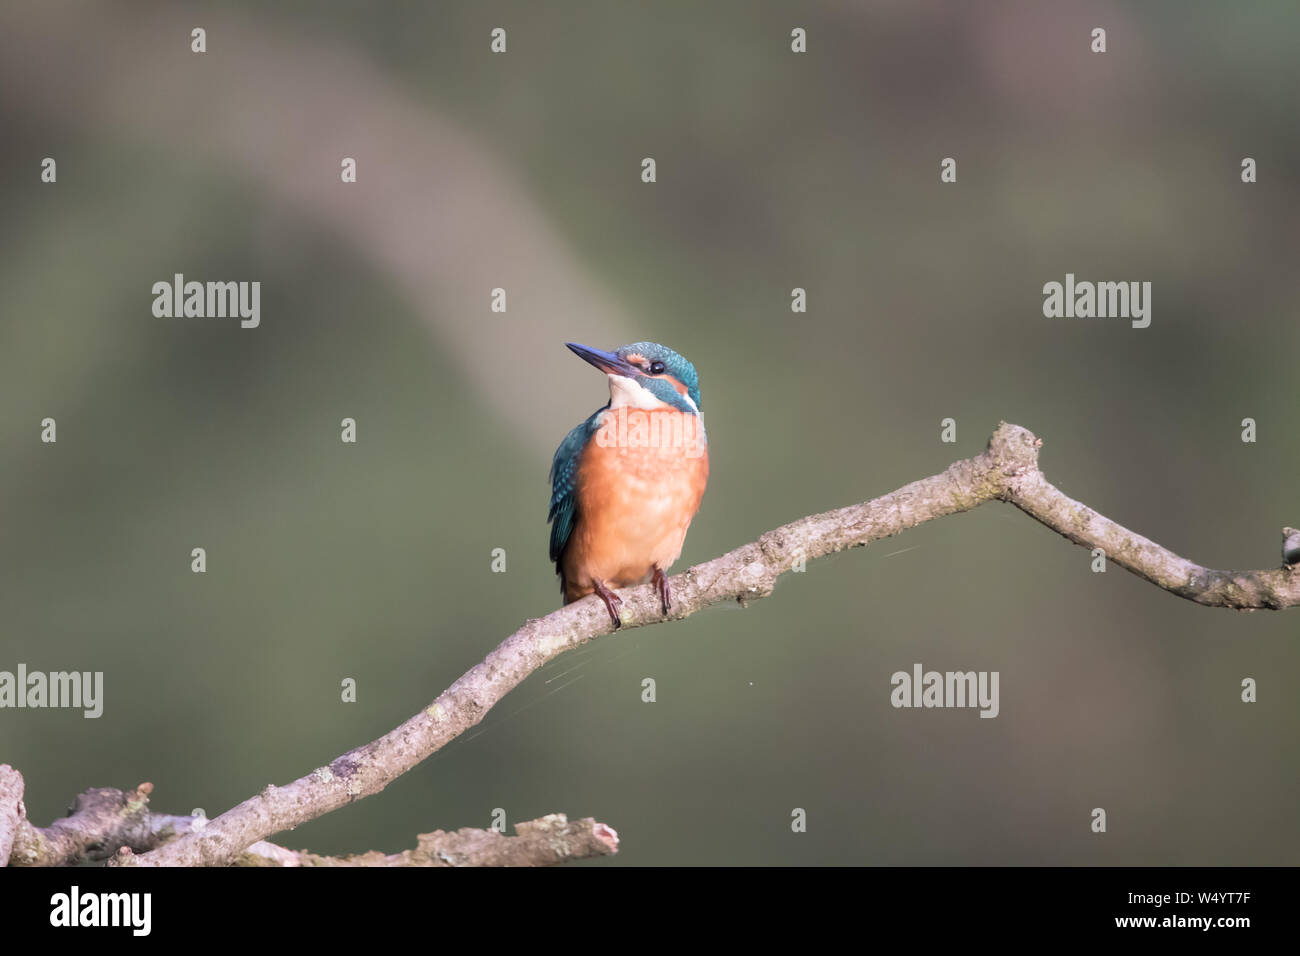 A young king fisher bird sits on his favourite perch Stock Photo